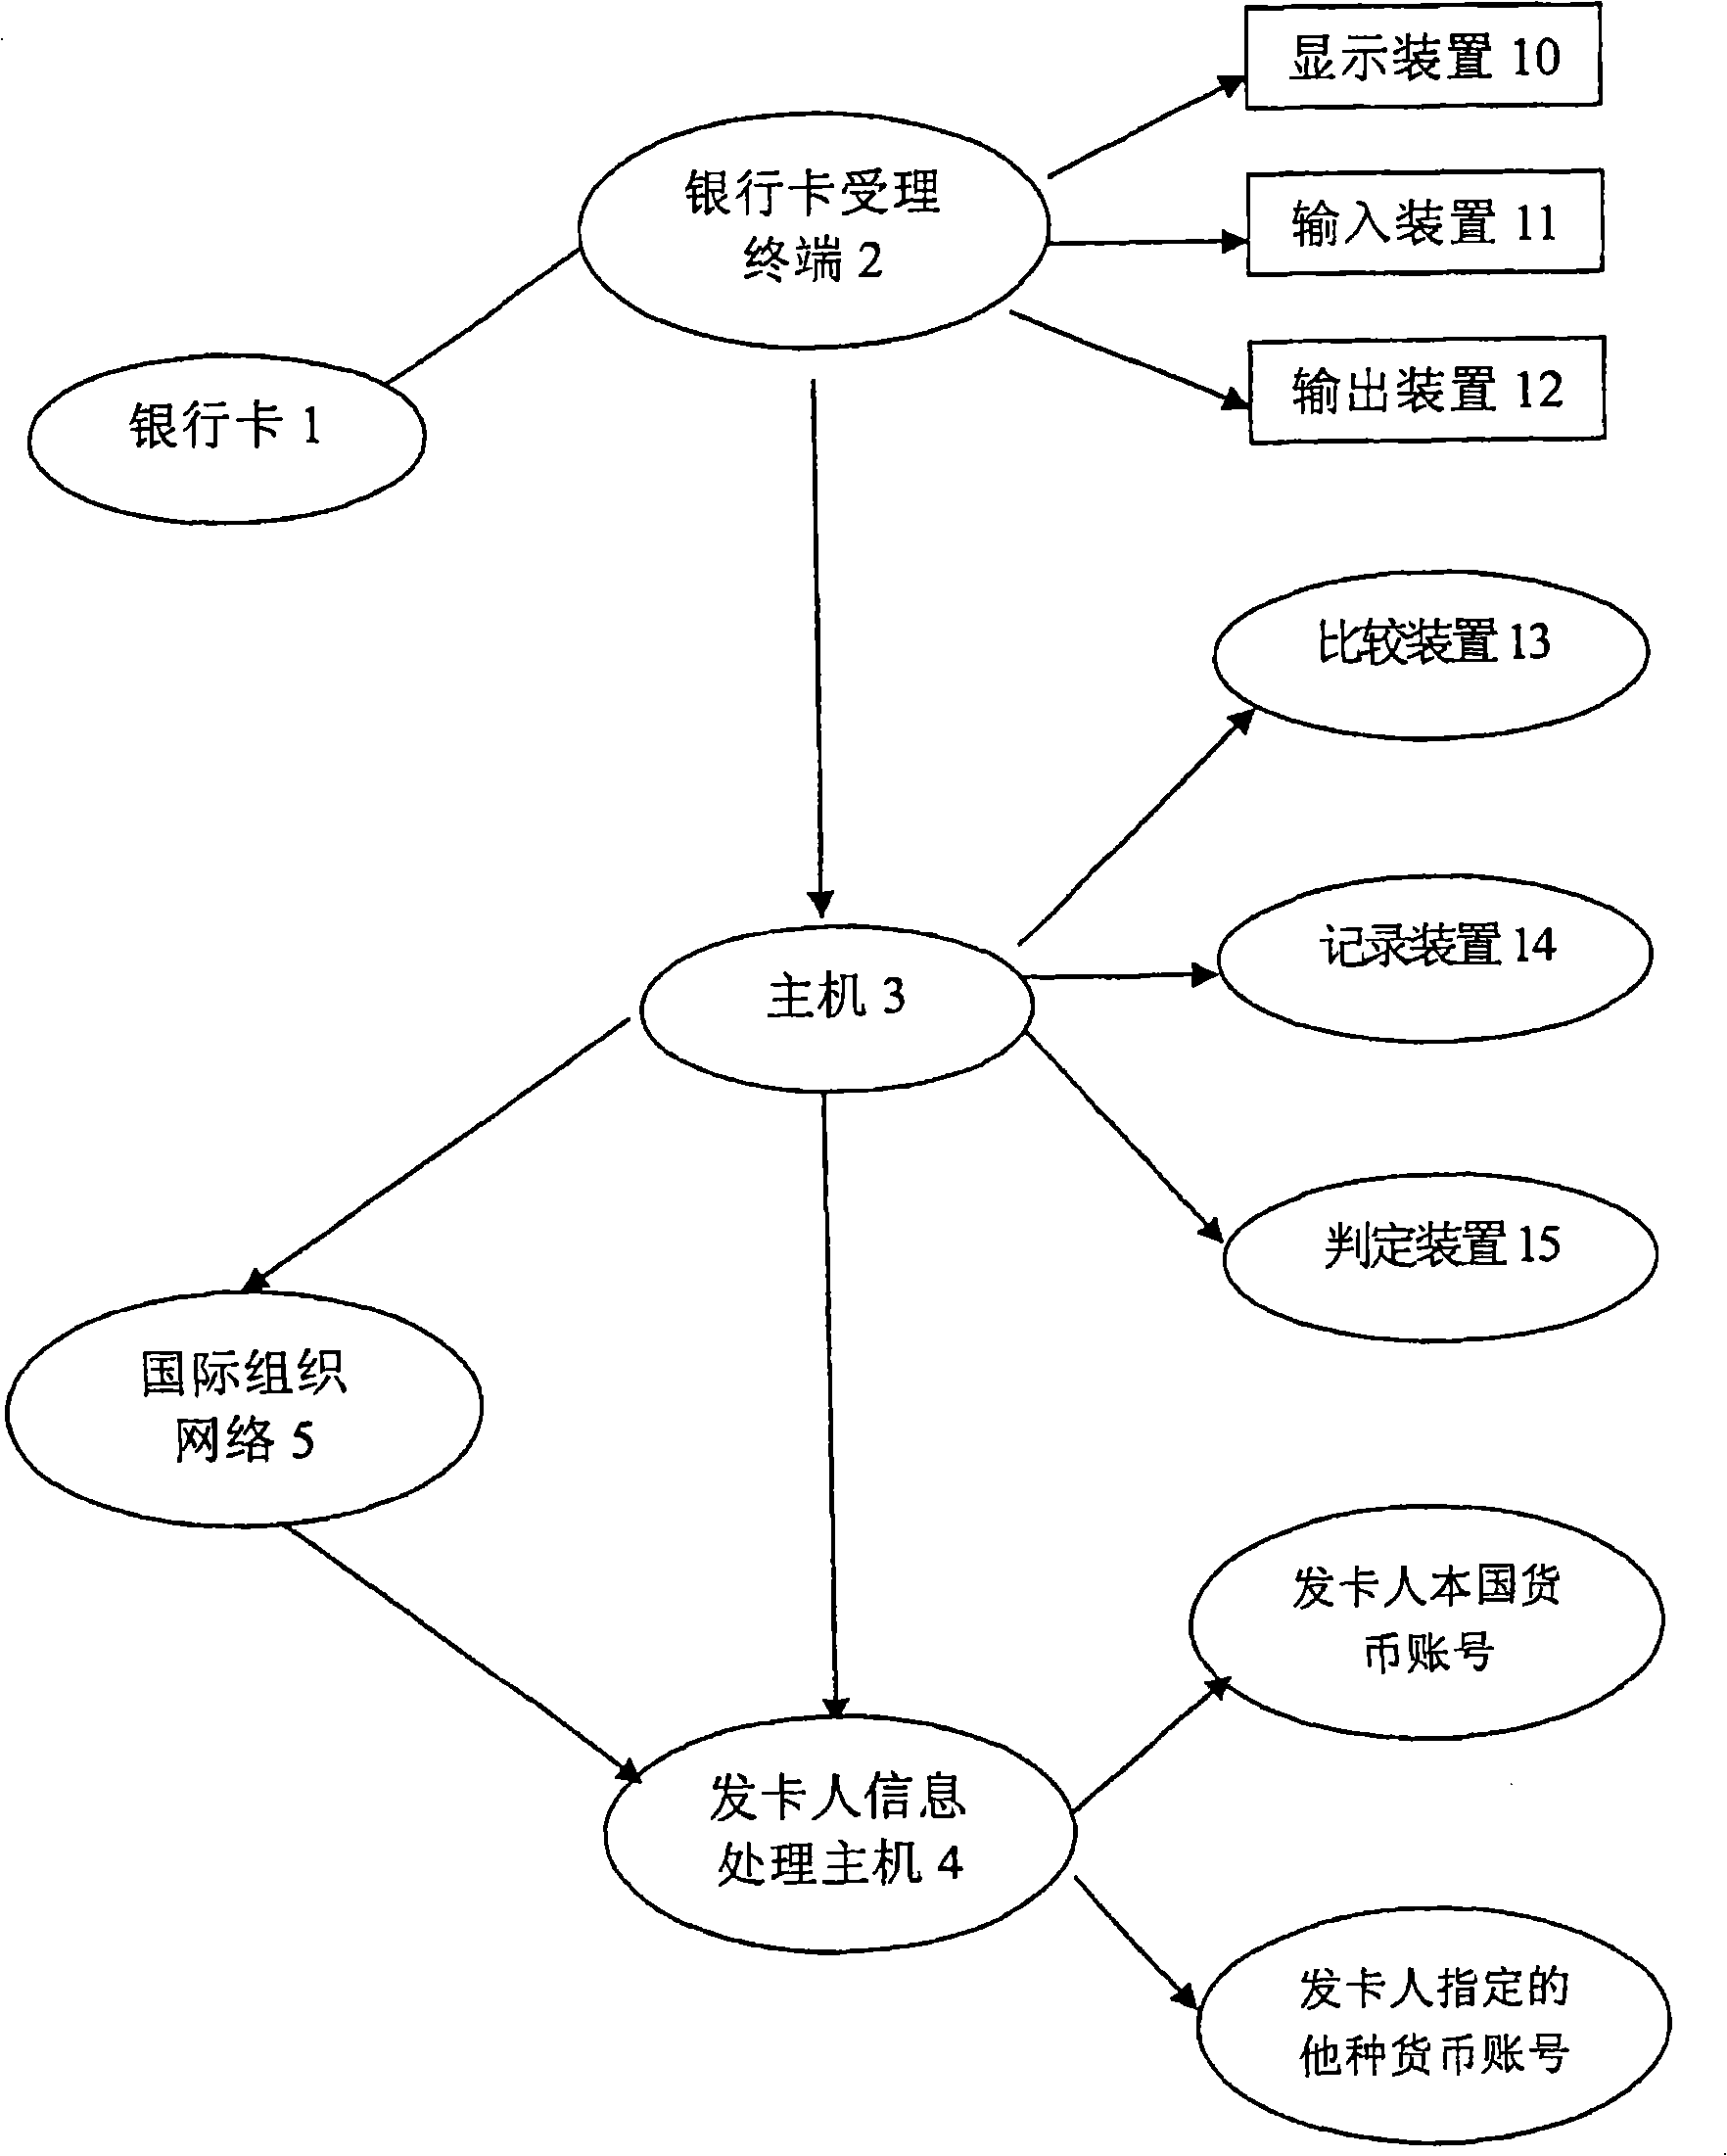 System and method for processing foreign currency bank card data based on network